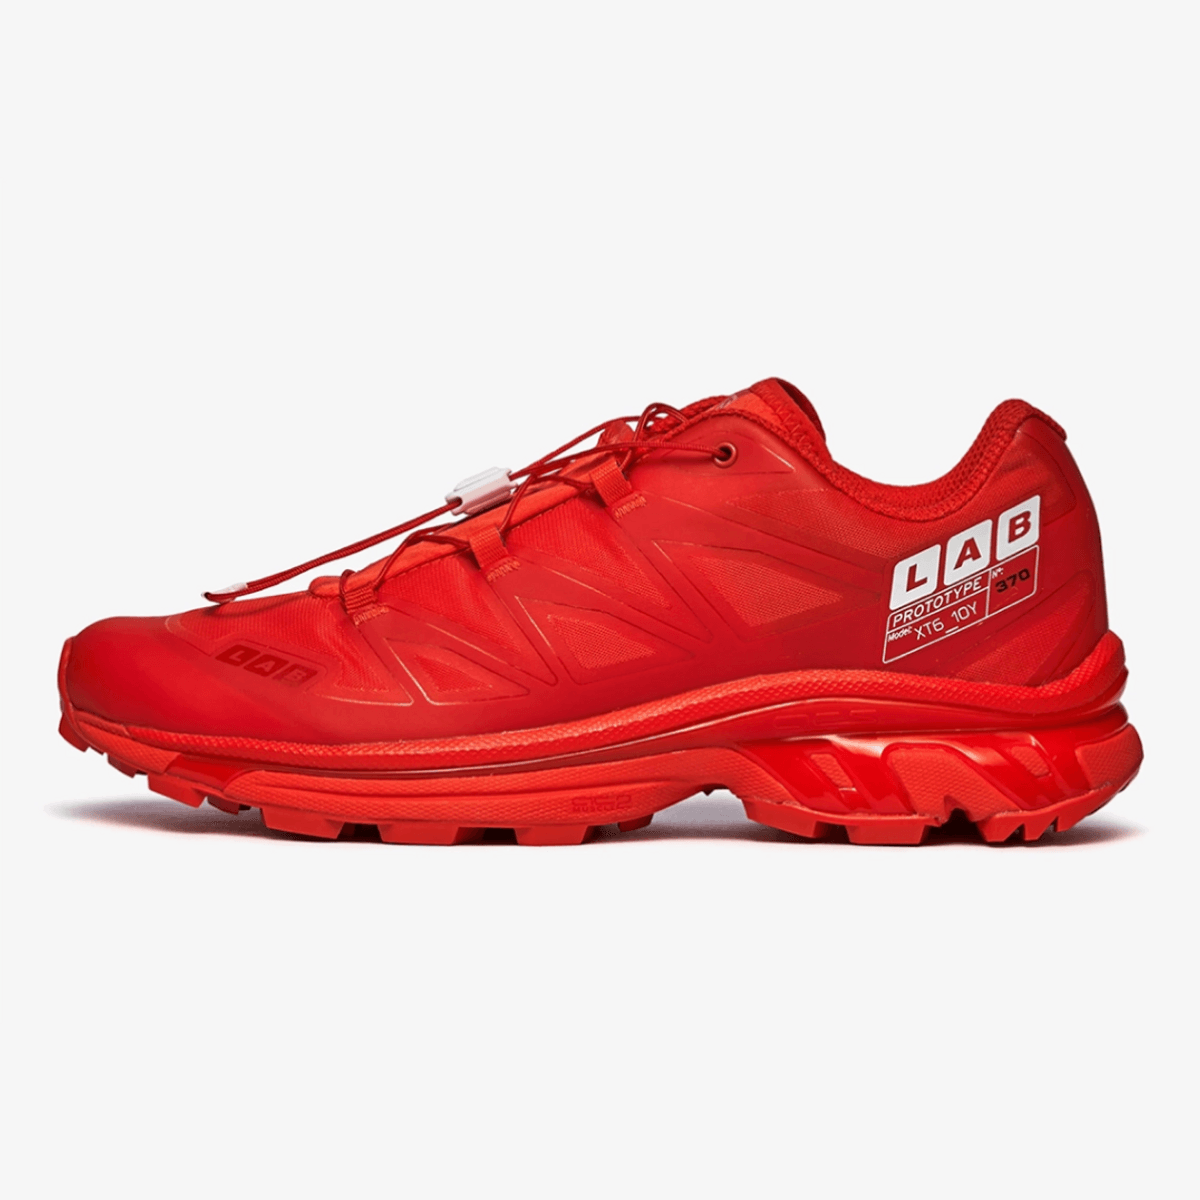 Celebrate The 10 Year Anniversary Of The Salomon XT-6 With An All Red Colorway